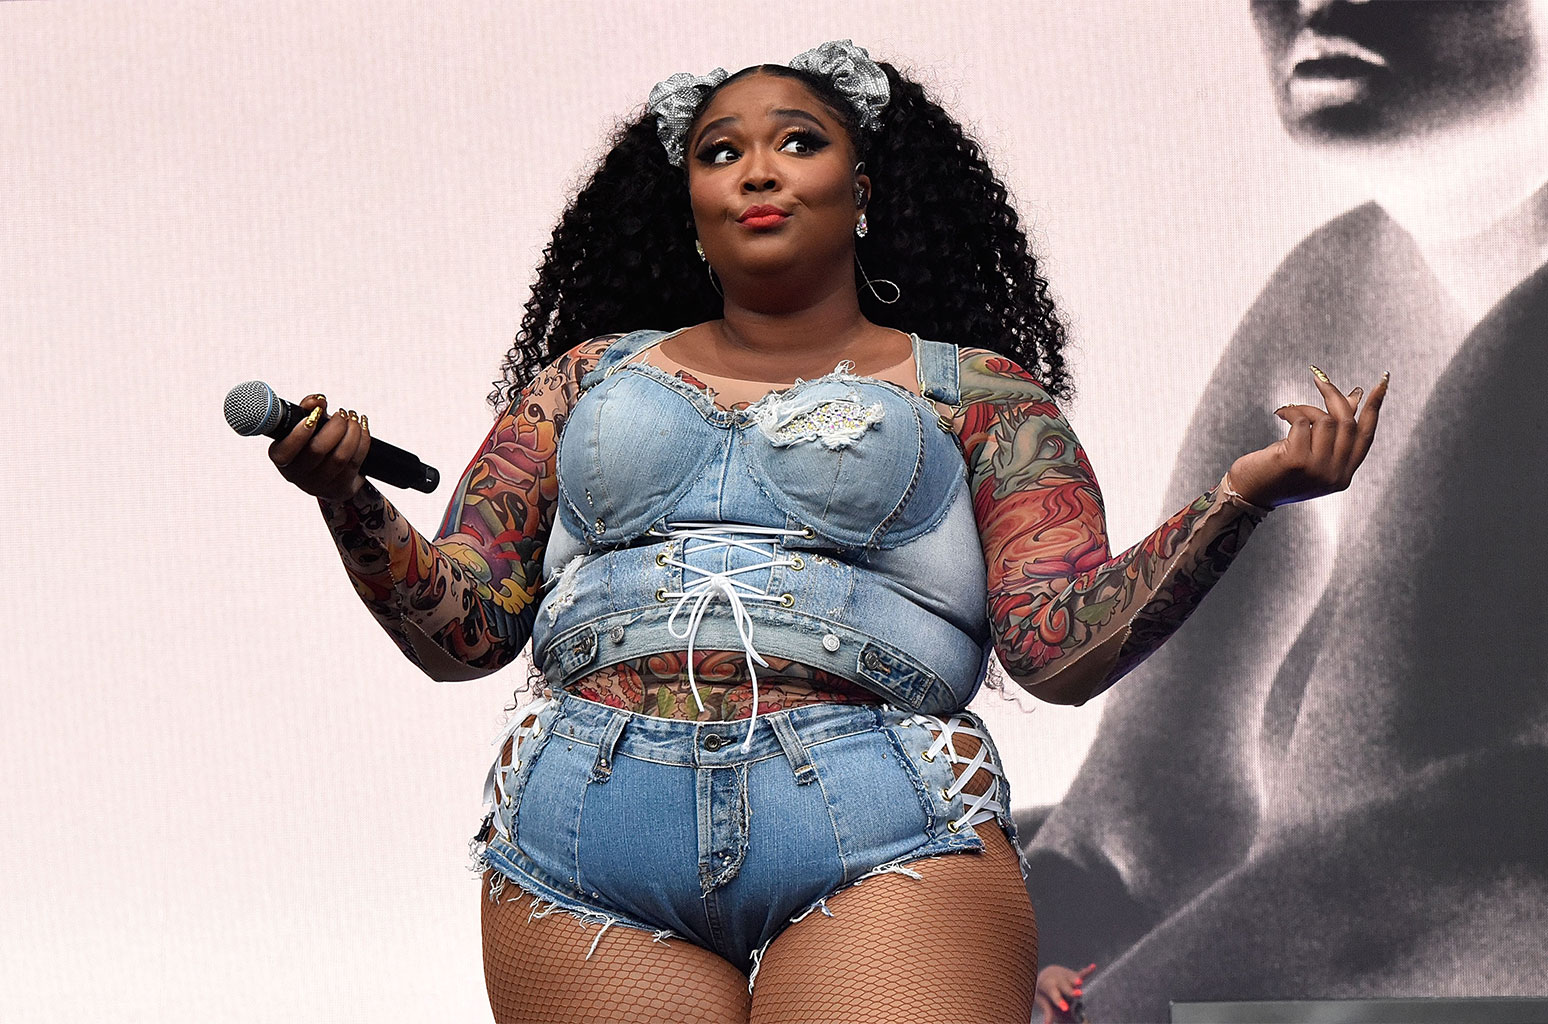 Lizzo Claps Back at Comment on Her Popularity &amp; Weight: 'Look in the Mirror Before You Come for Me' - www.billboard.com